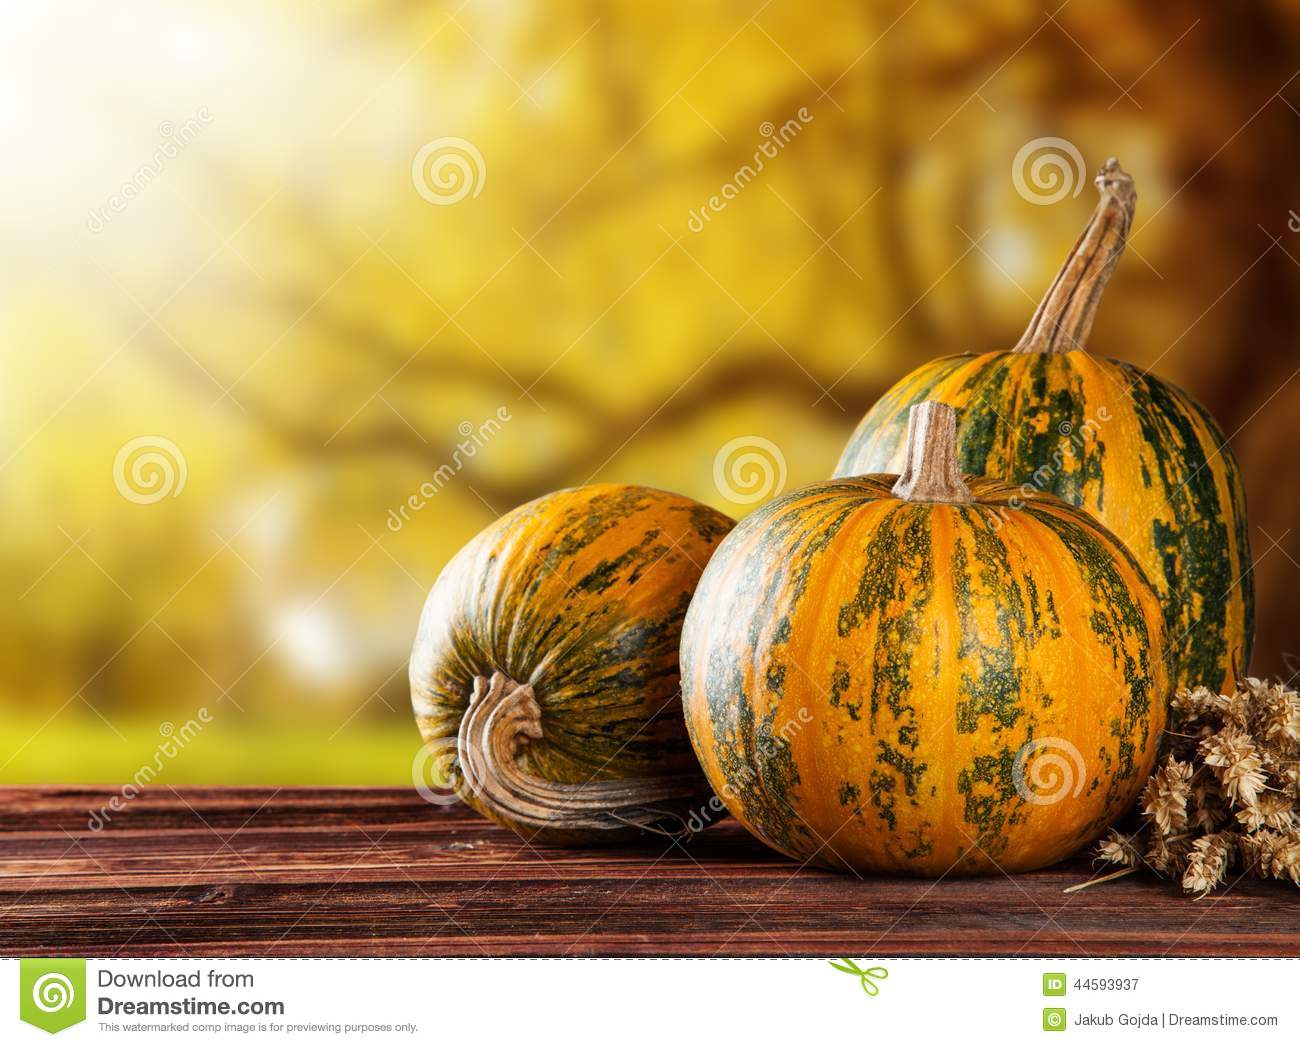 Concept Of Halloween Pumpkins On Wooden Planks With Blur Background 